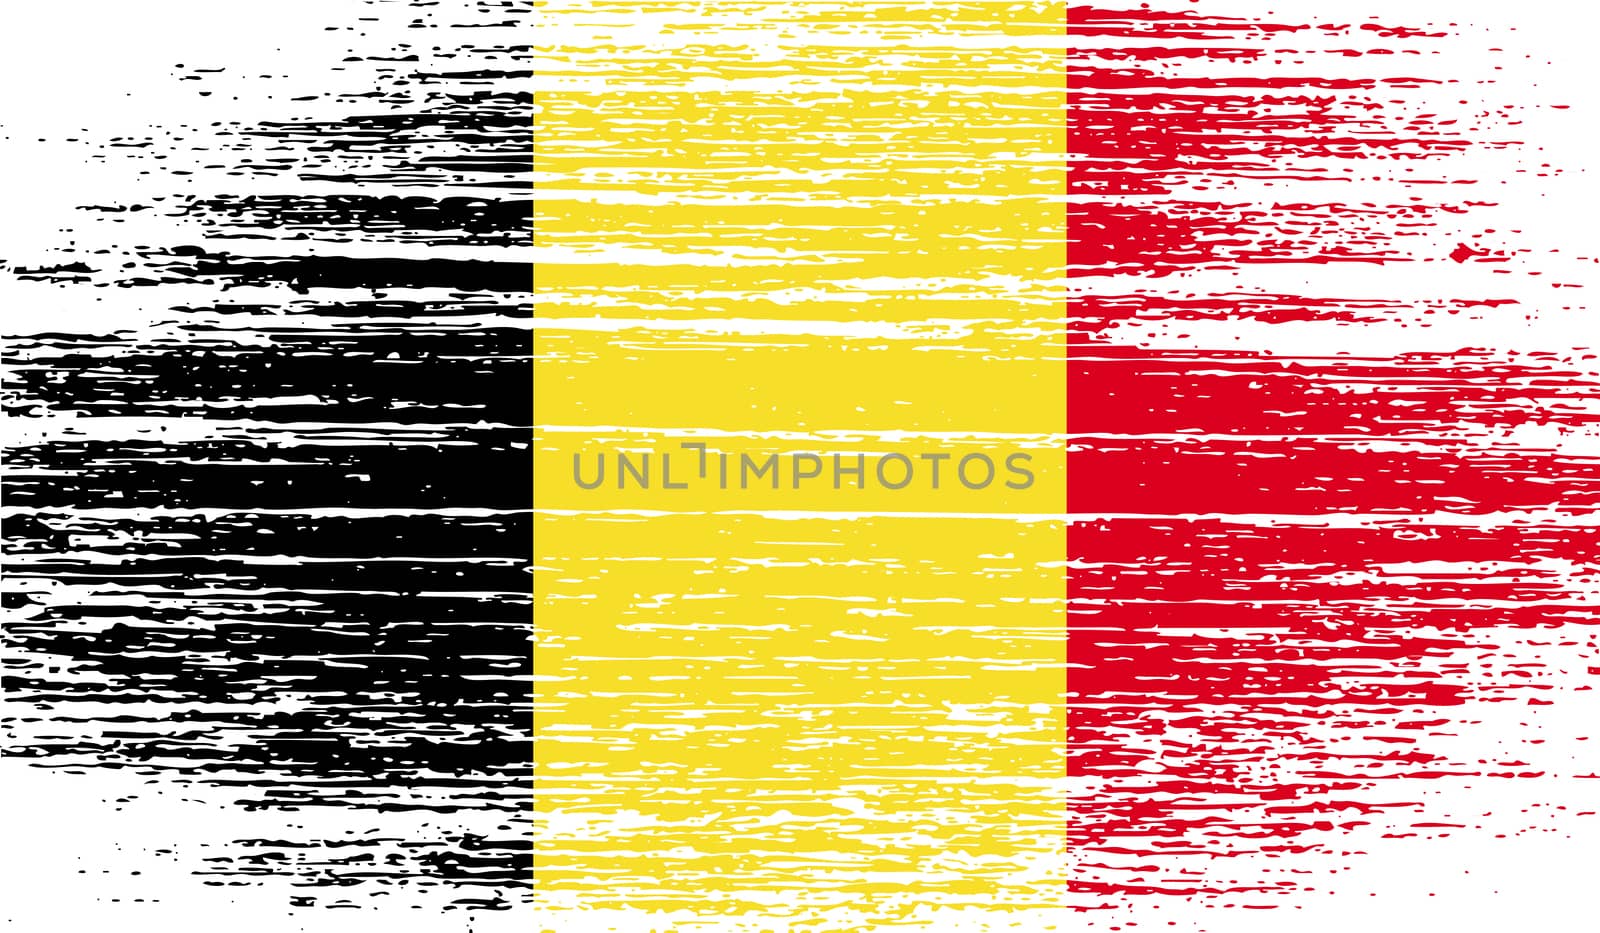 Flag of Belgium with old texture.  illustration